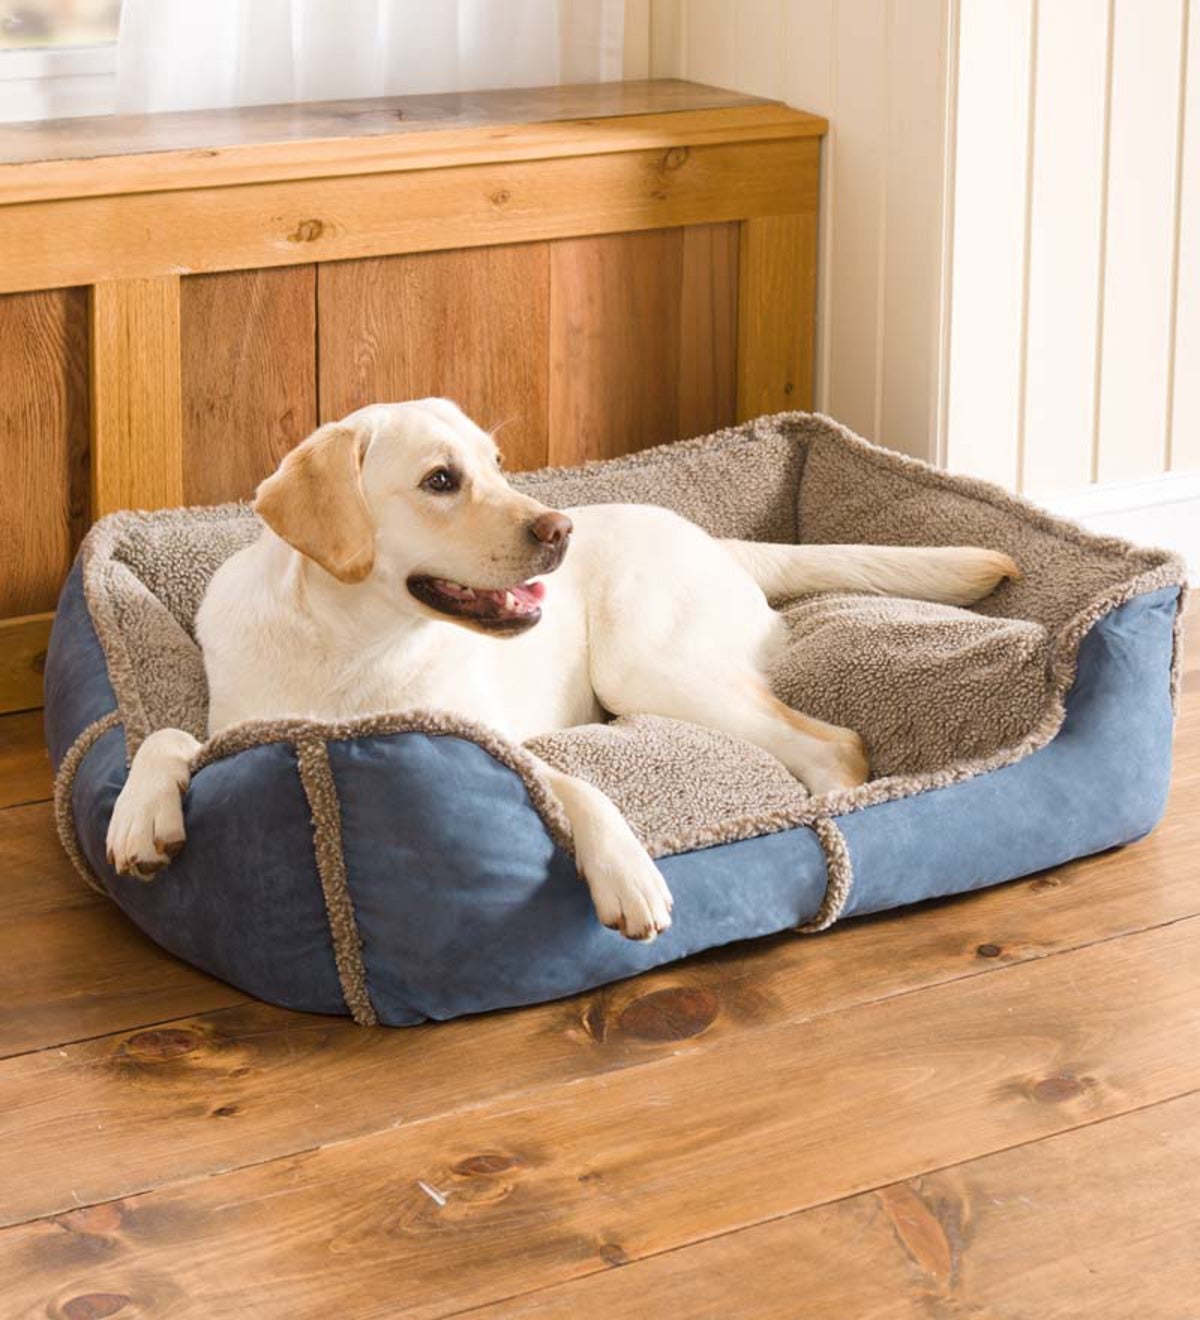 Extra-Large Faux Suede And Berber Rectangular Dog Bed